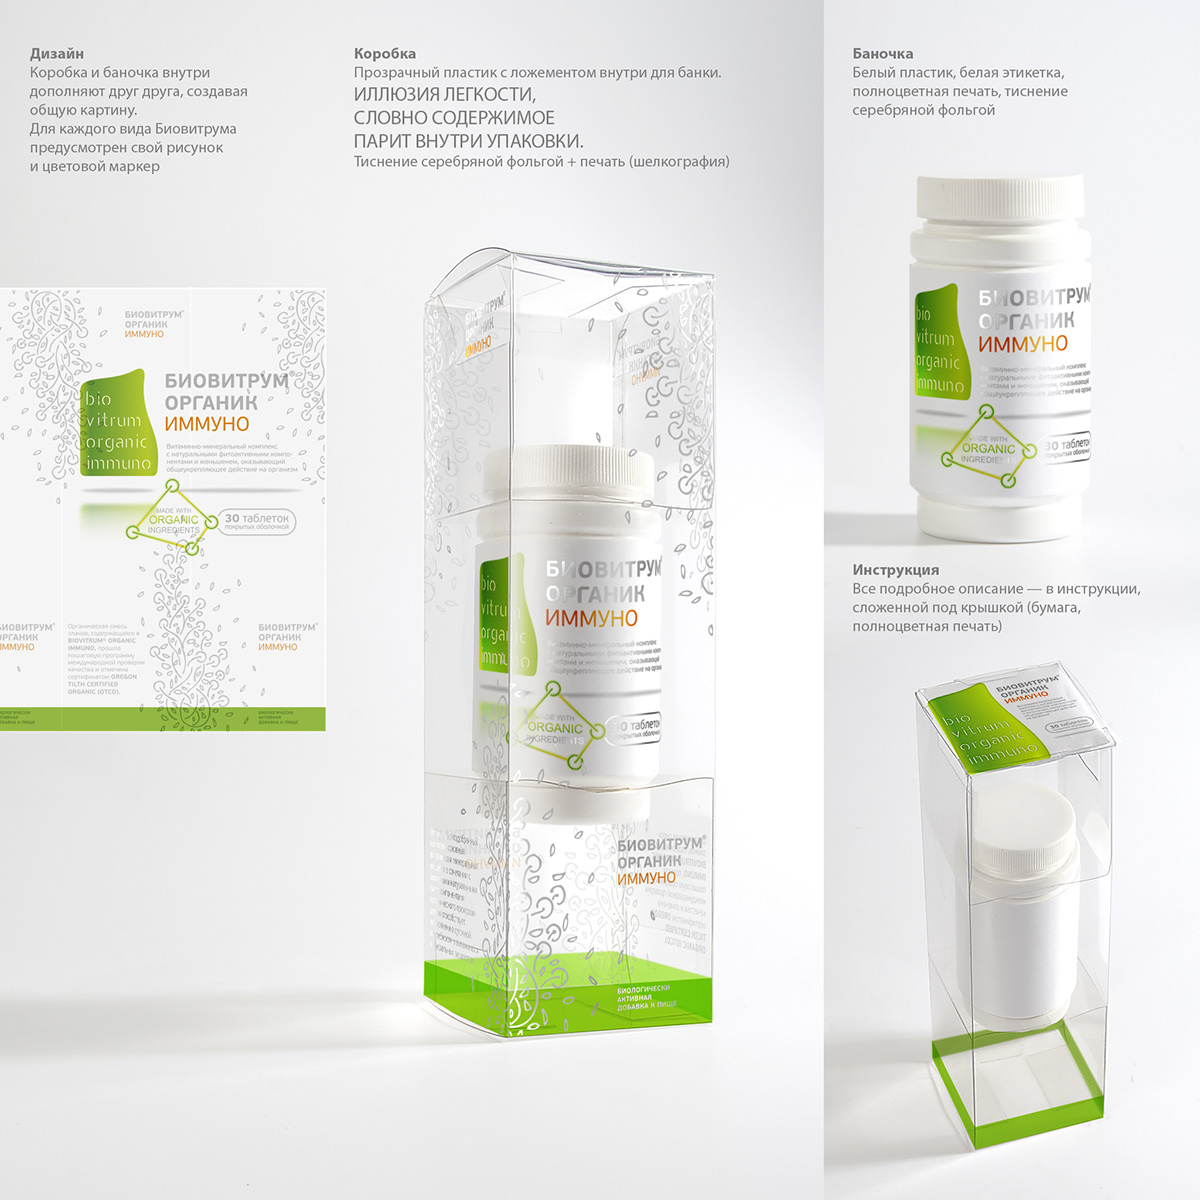 bio dietary supplement eco healthy light organic package design  Soar Transparency weightlessness